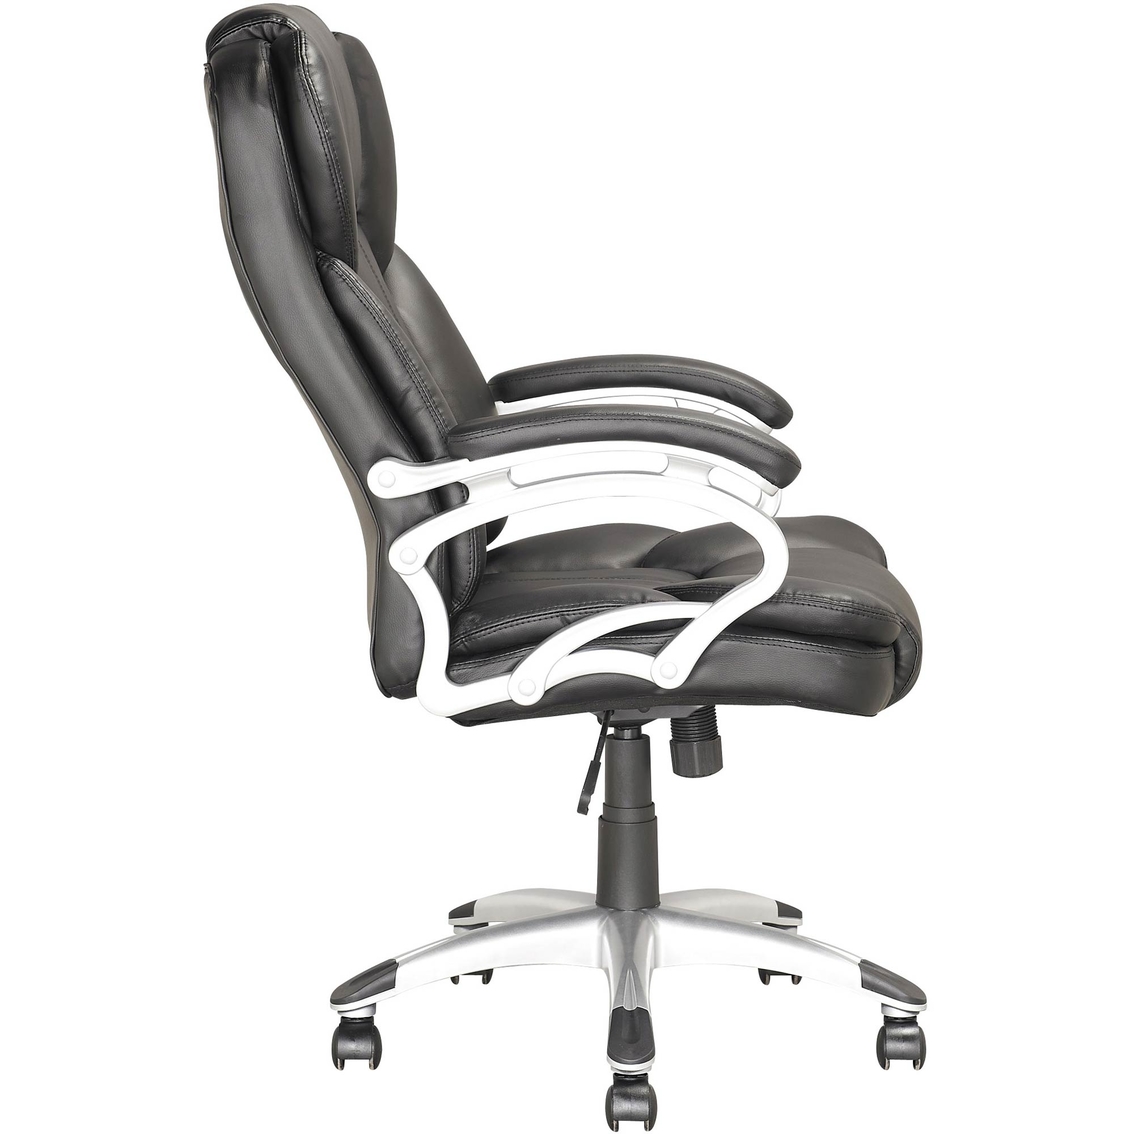 CorLiving Leatherette Executive Office Chair - Image 2 of 4